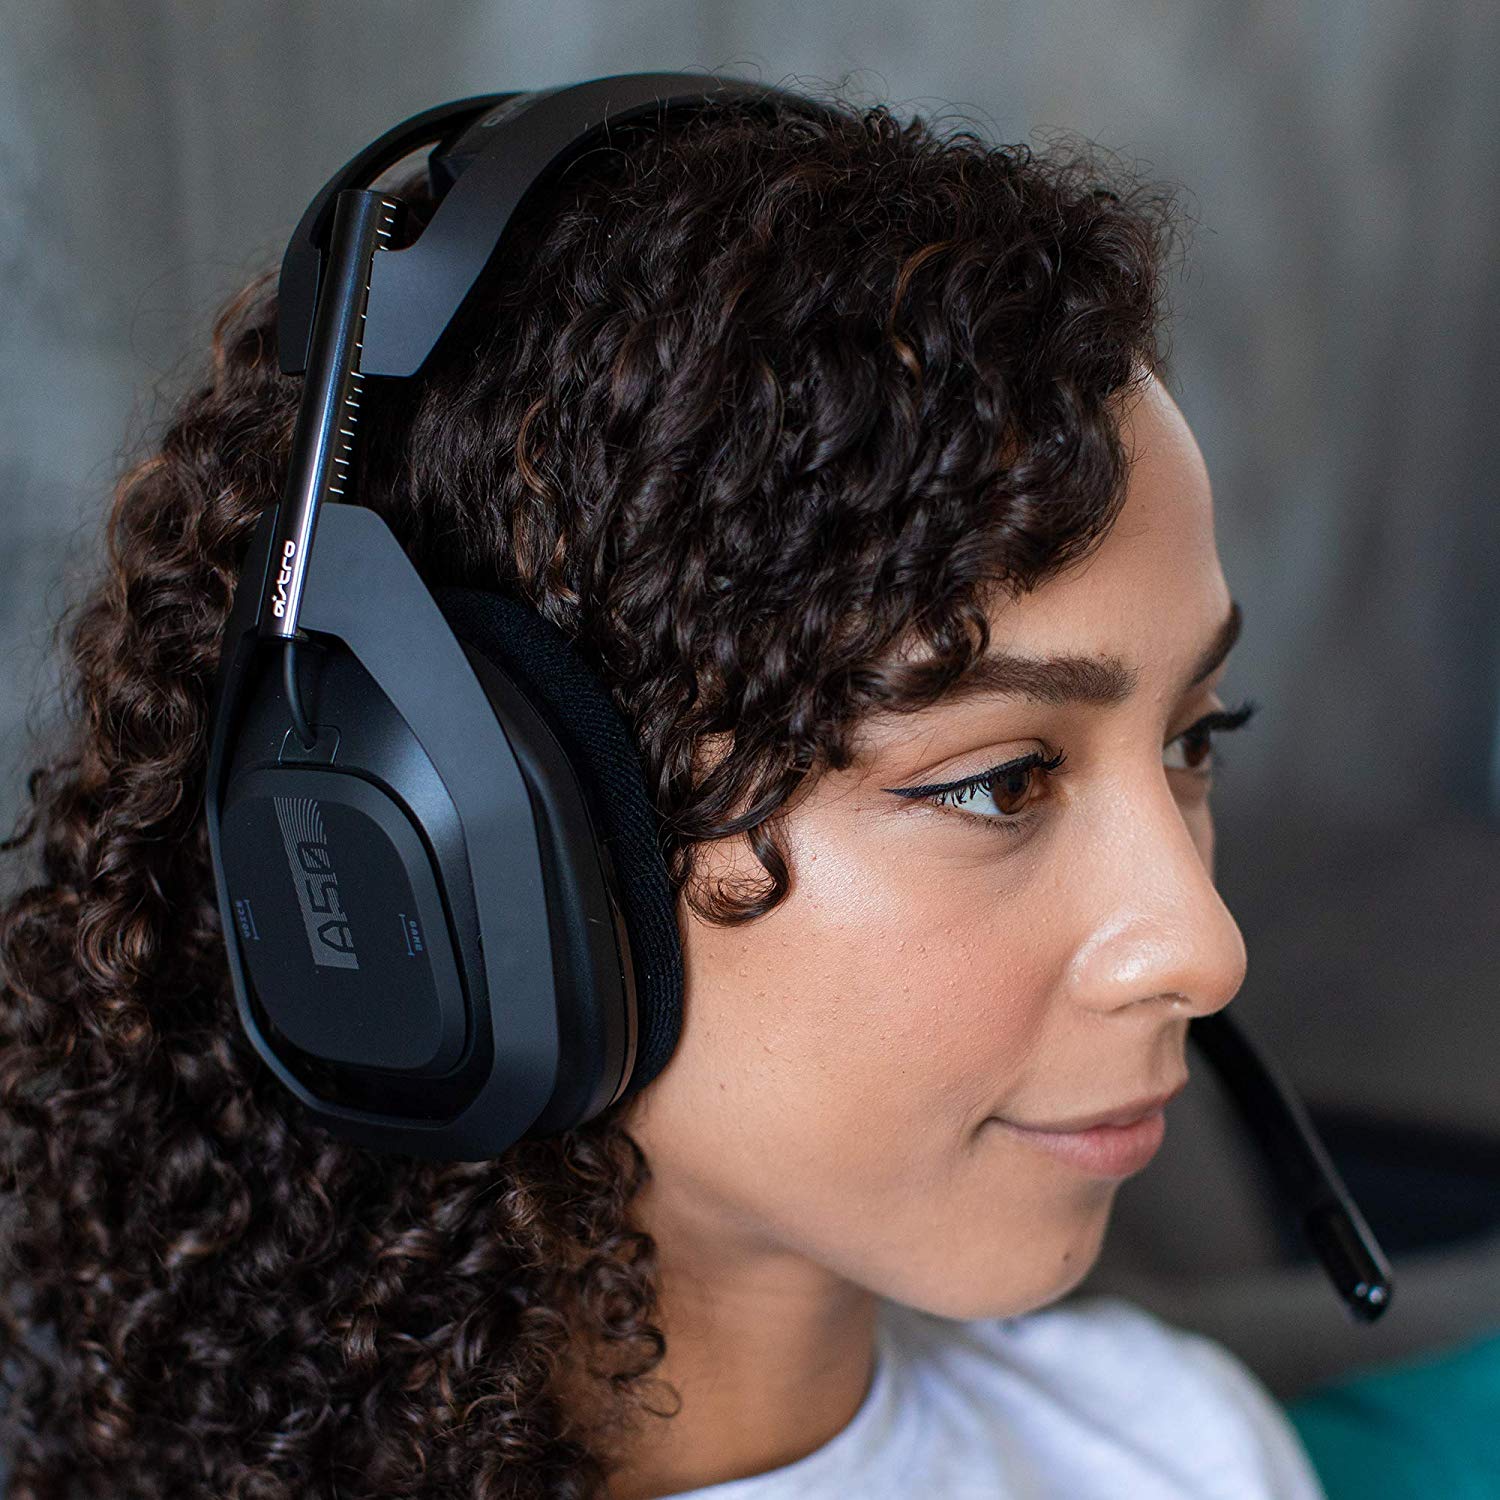 Astro Gaming A50 Drahtloses Headset im Test